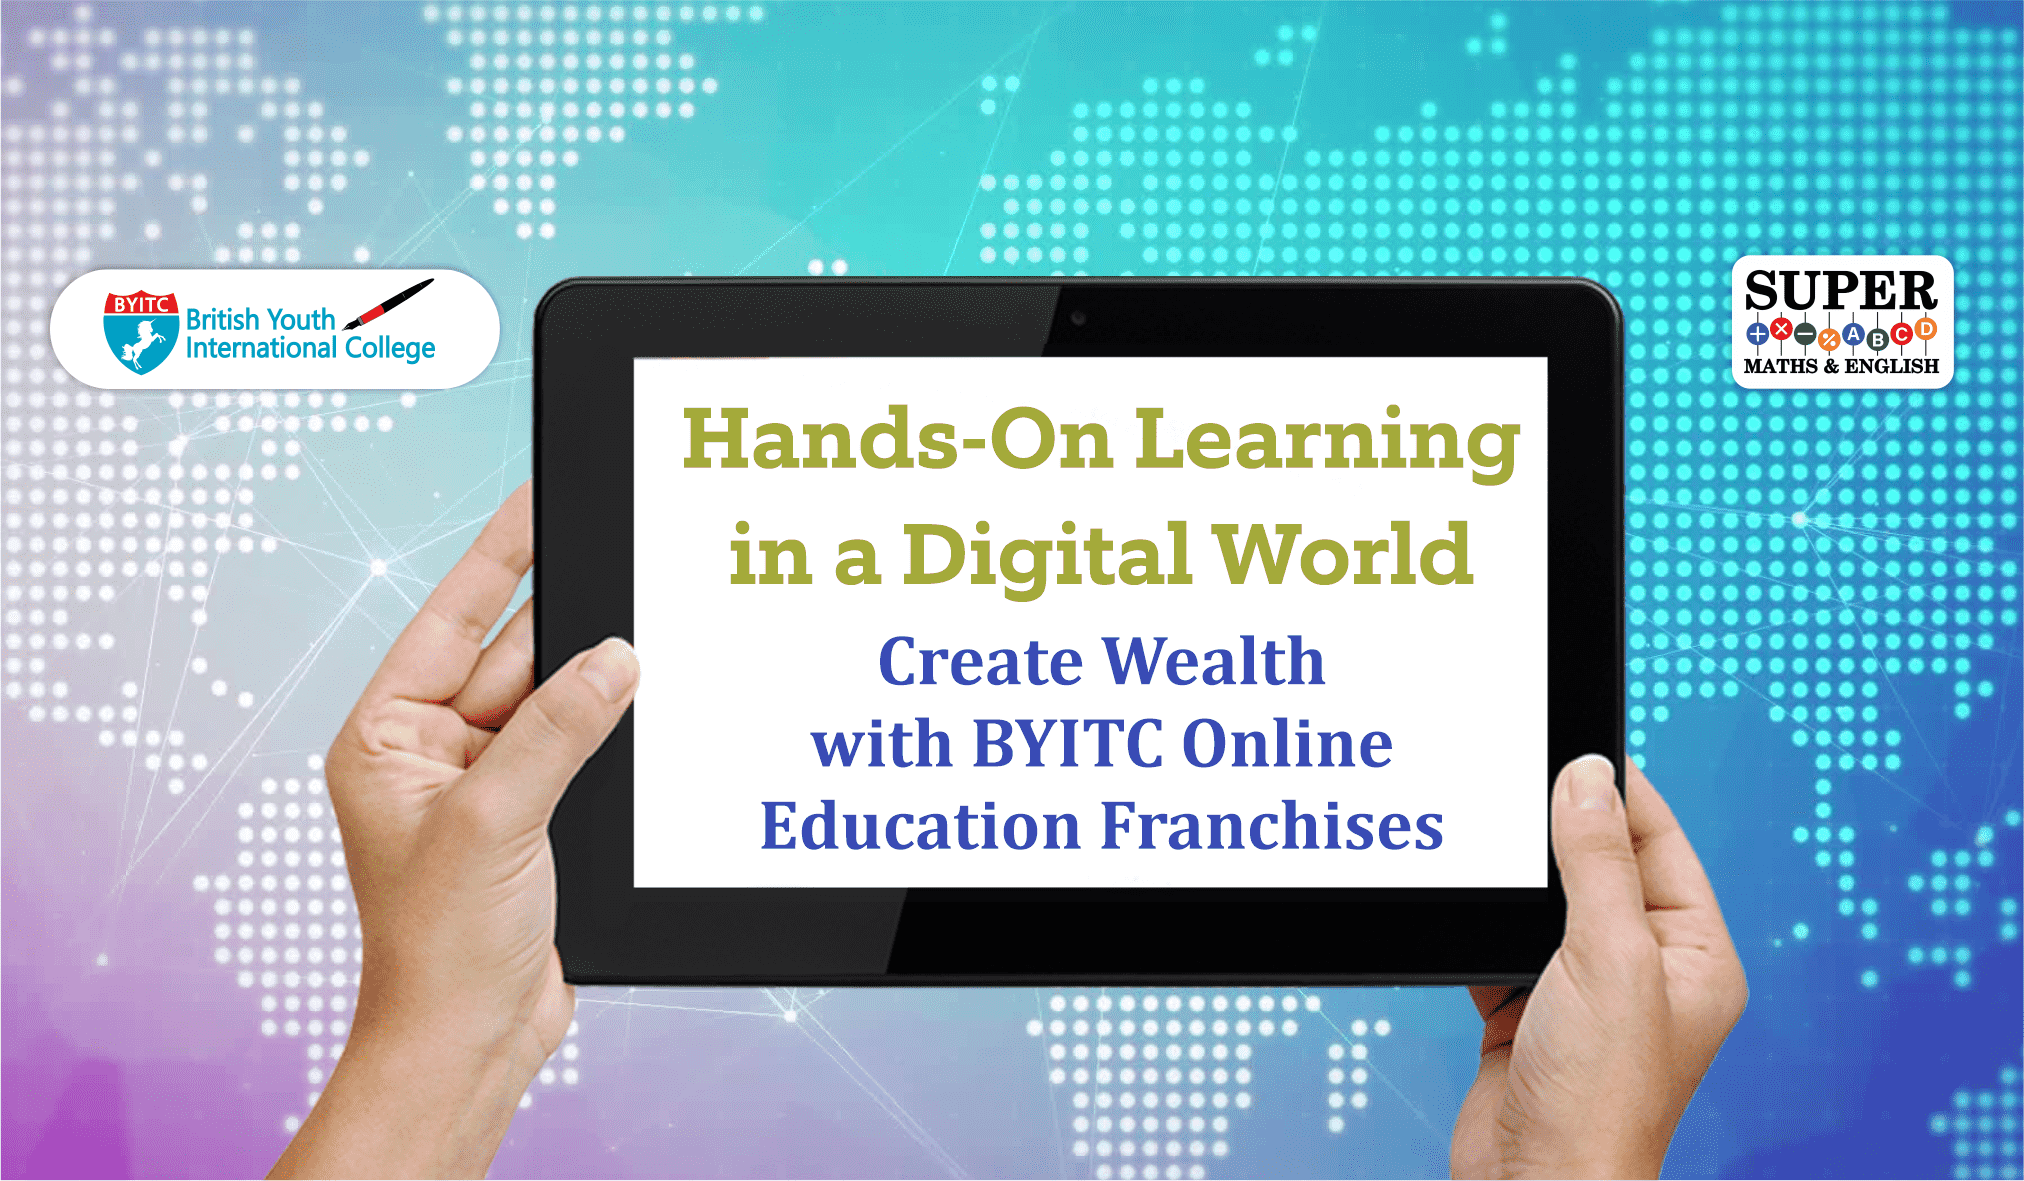 Hands-On Learning in a Digital World Create Wealth with BYITC Online Education Franchises